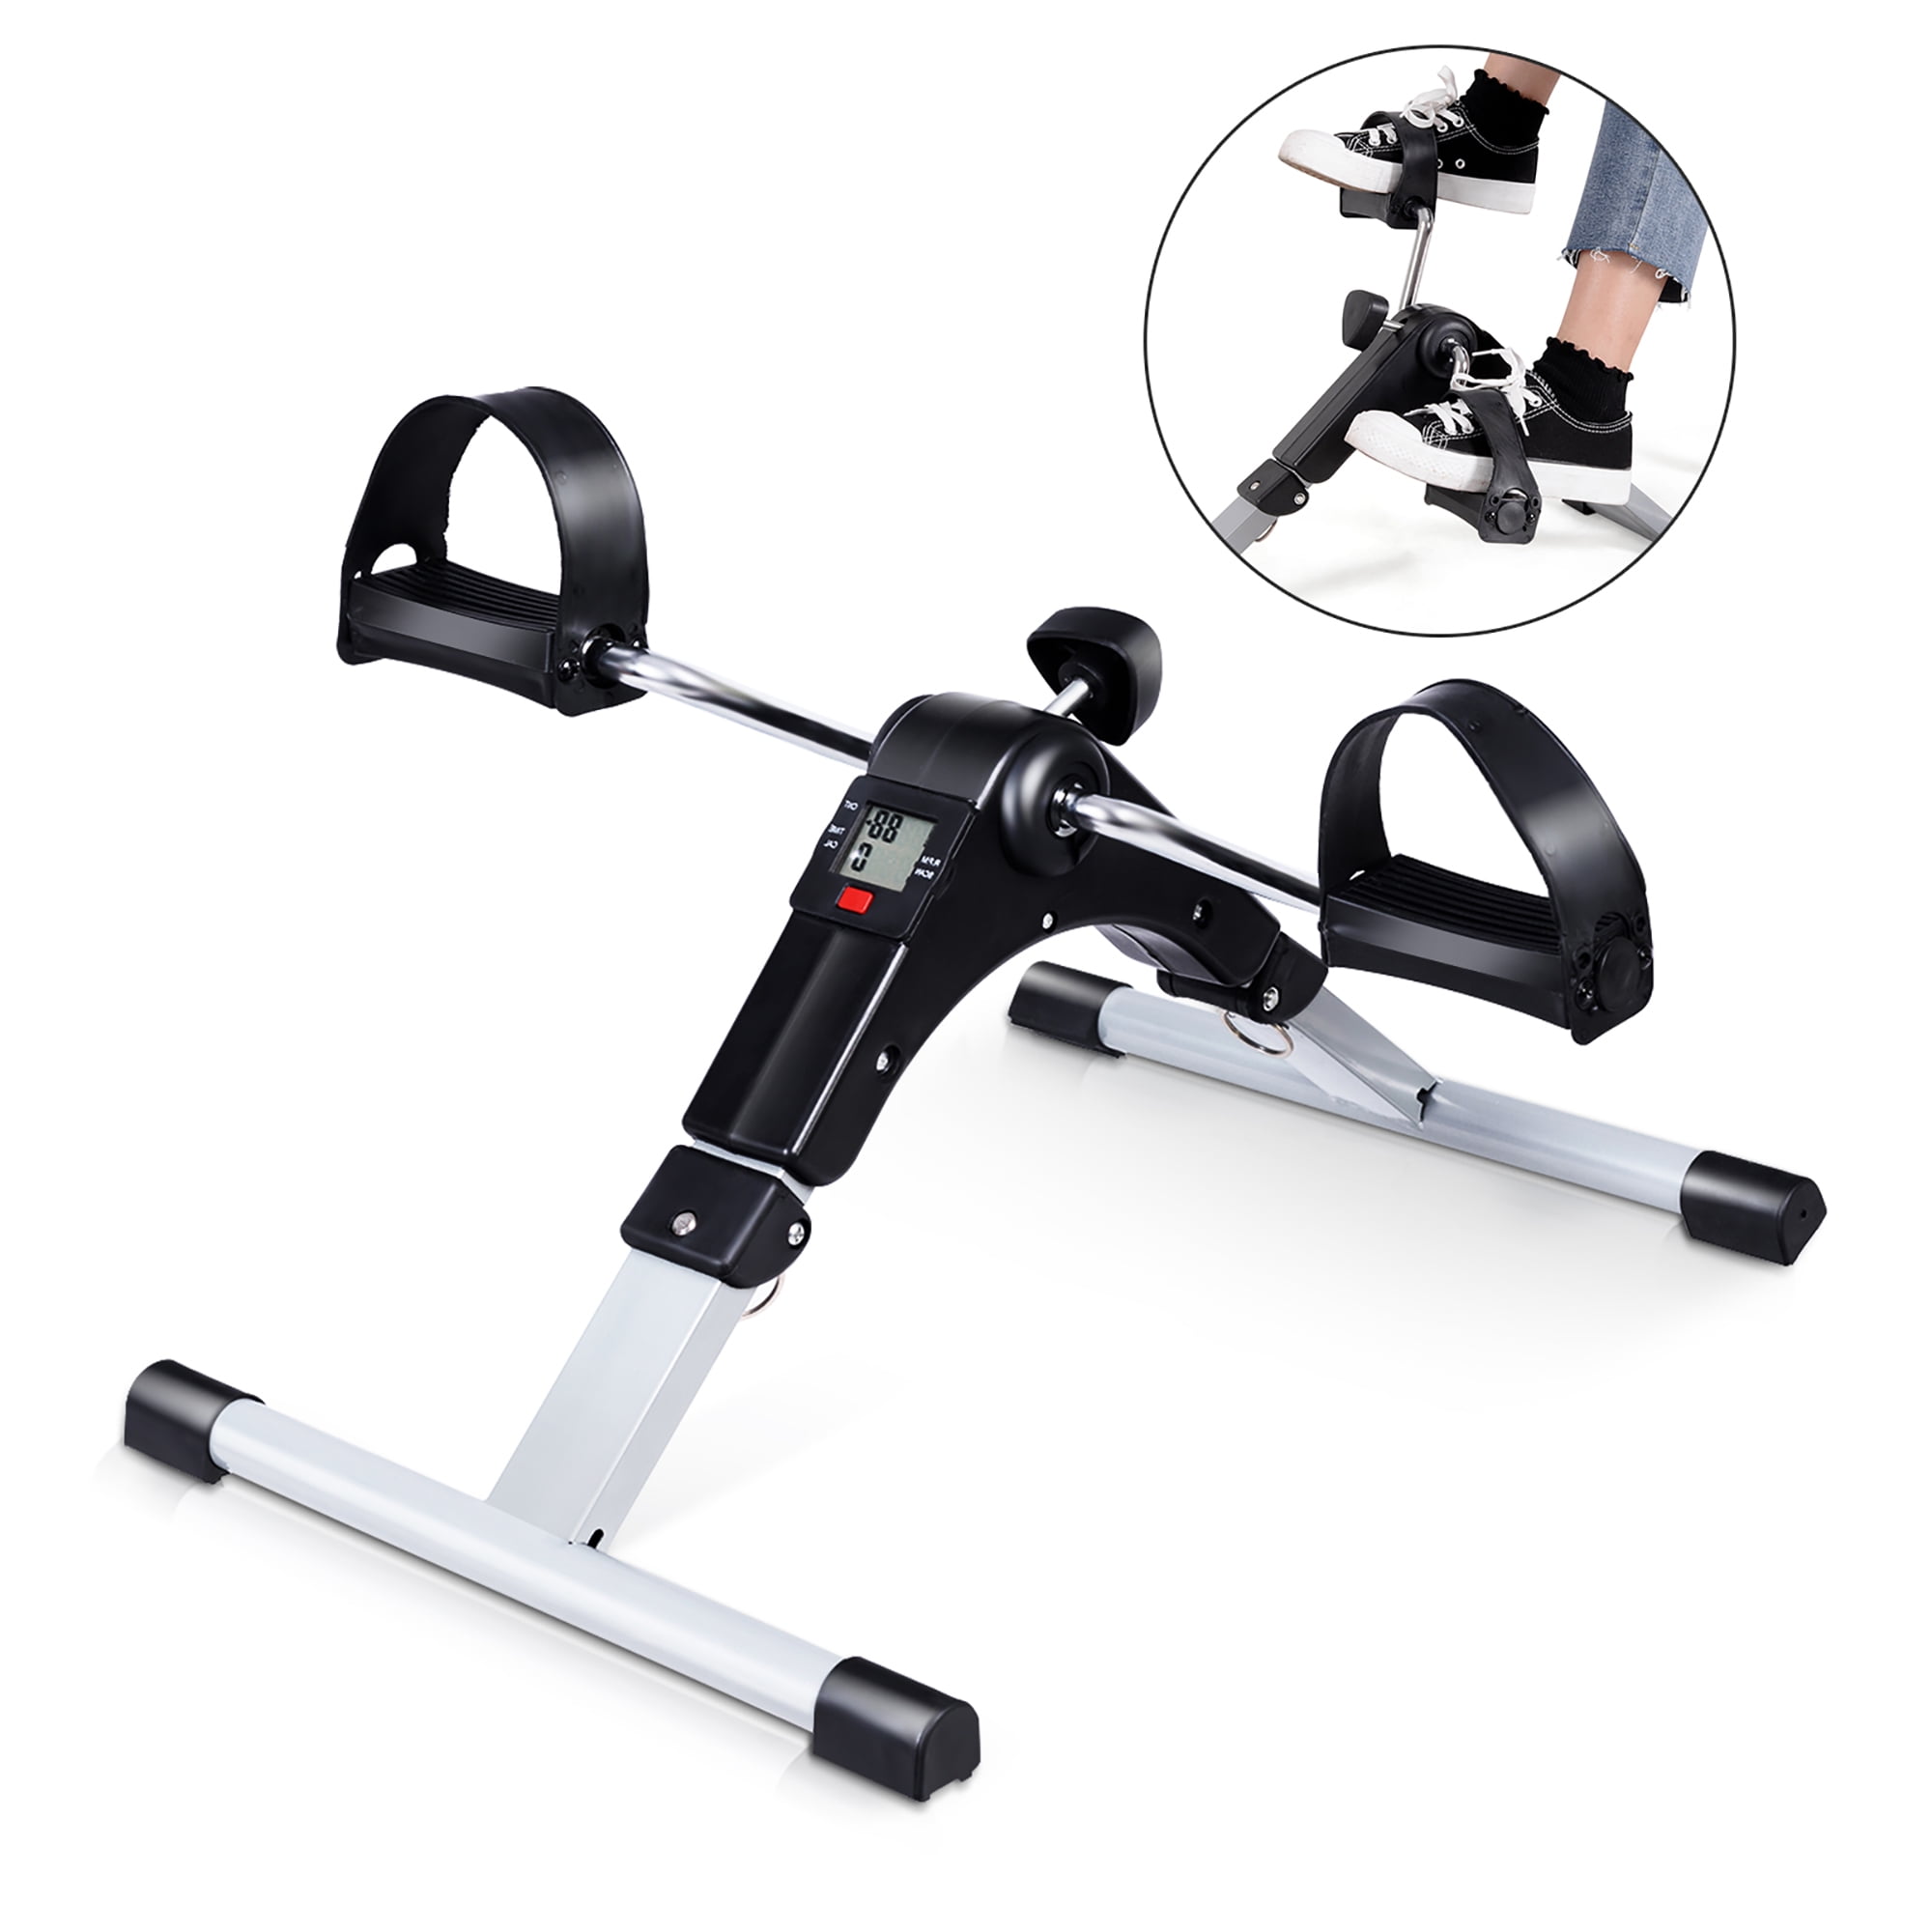 Mini Pedal Exercise CycleMarcy NS-912 Portable Stationary Pedal Exercise Desk 